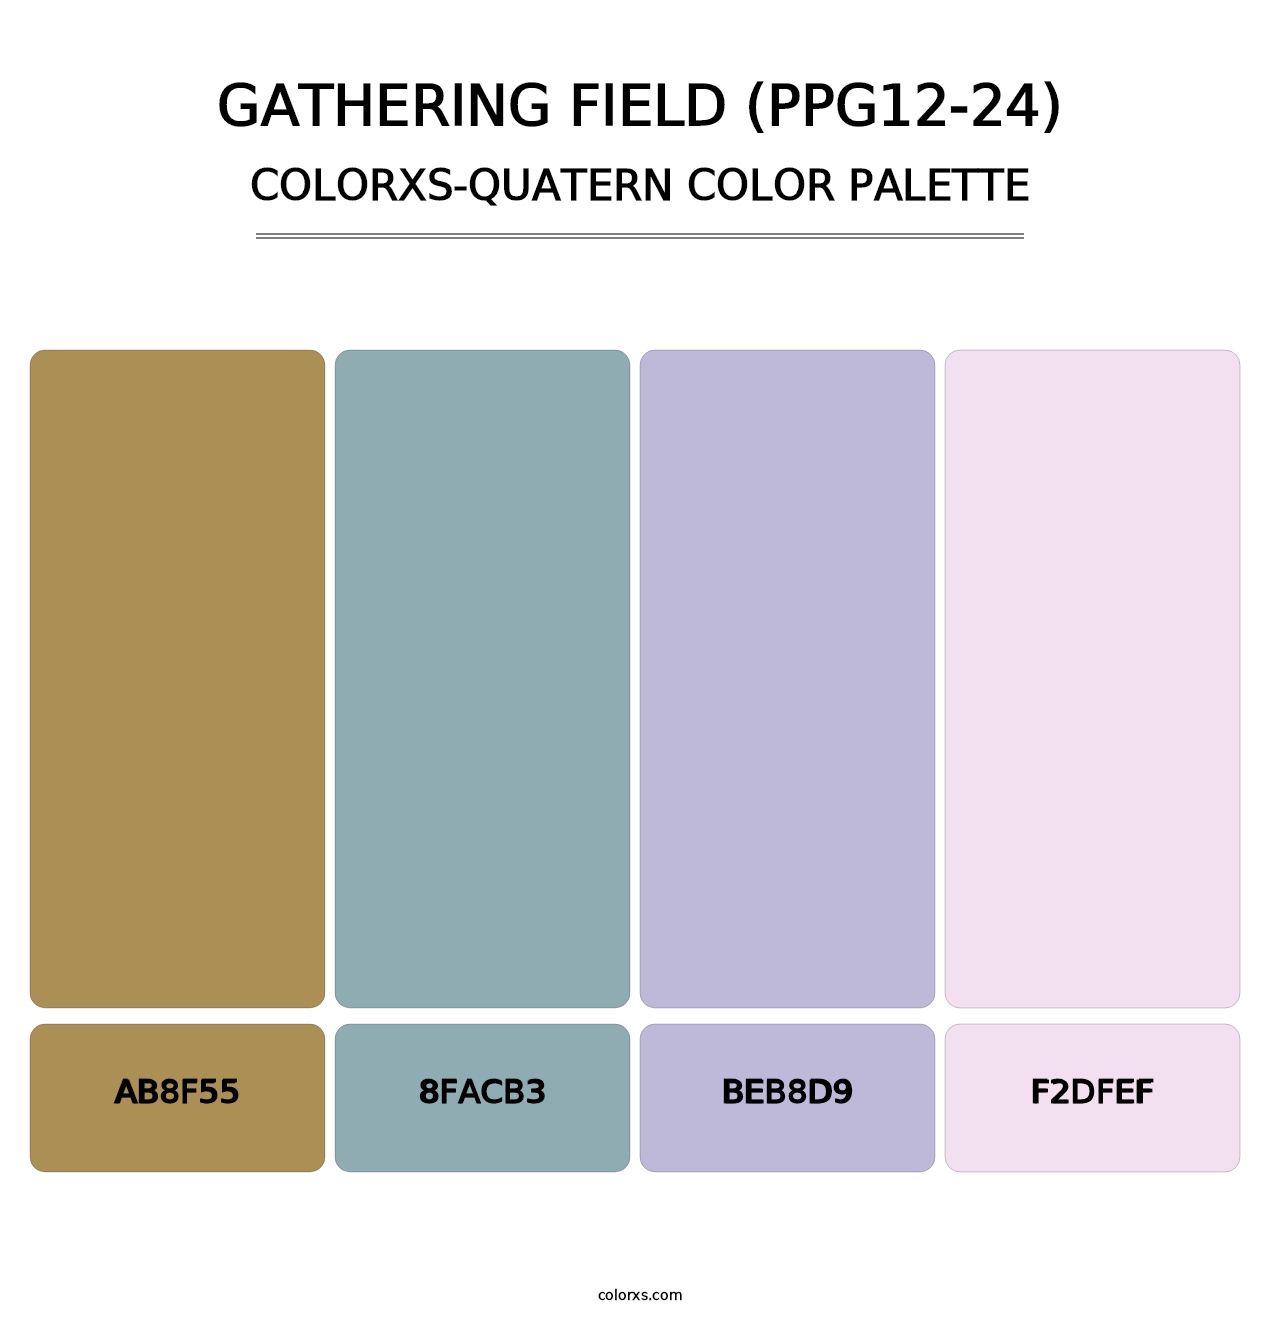 Gathering Field (PPG12-24) - Colorxs Quatern Palette